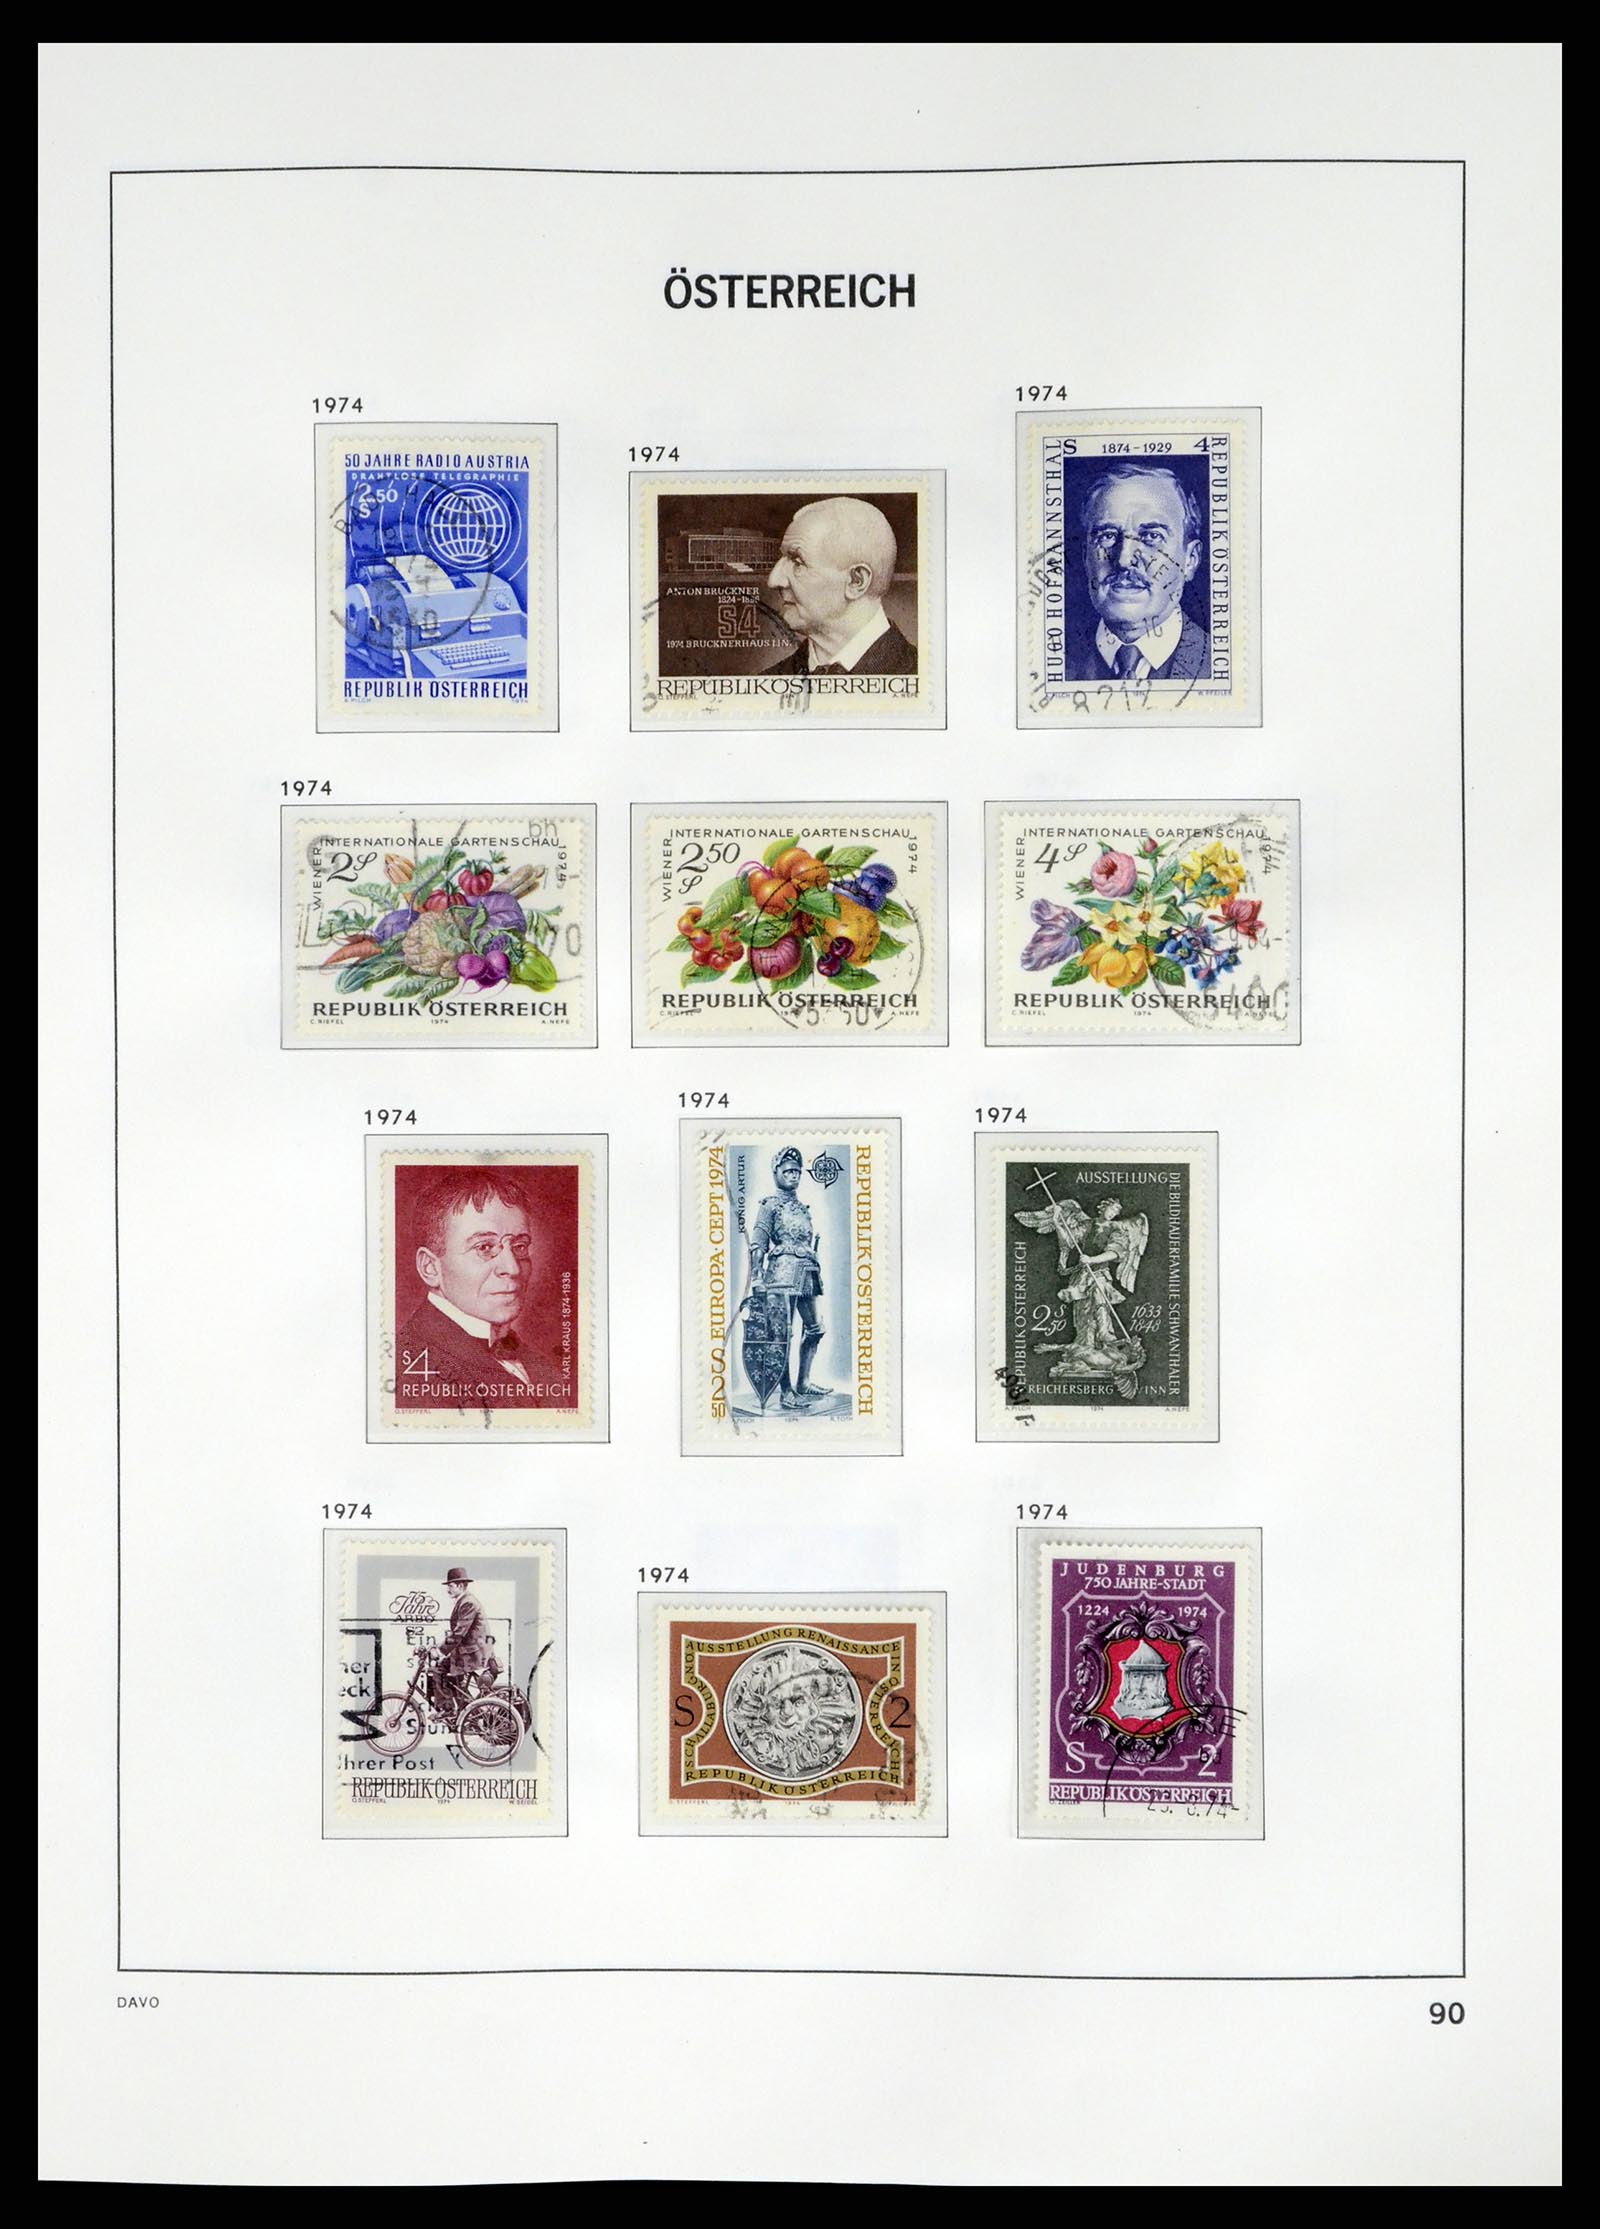 37675 100 - Stamp collection 37675 Austria 1850-2019!